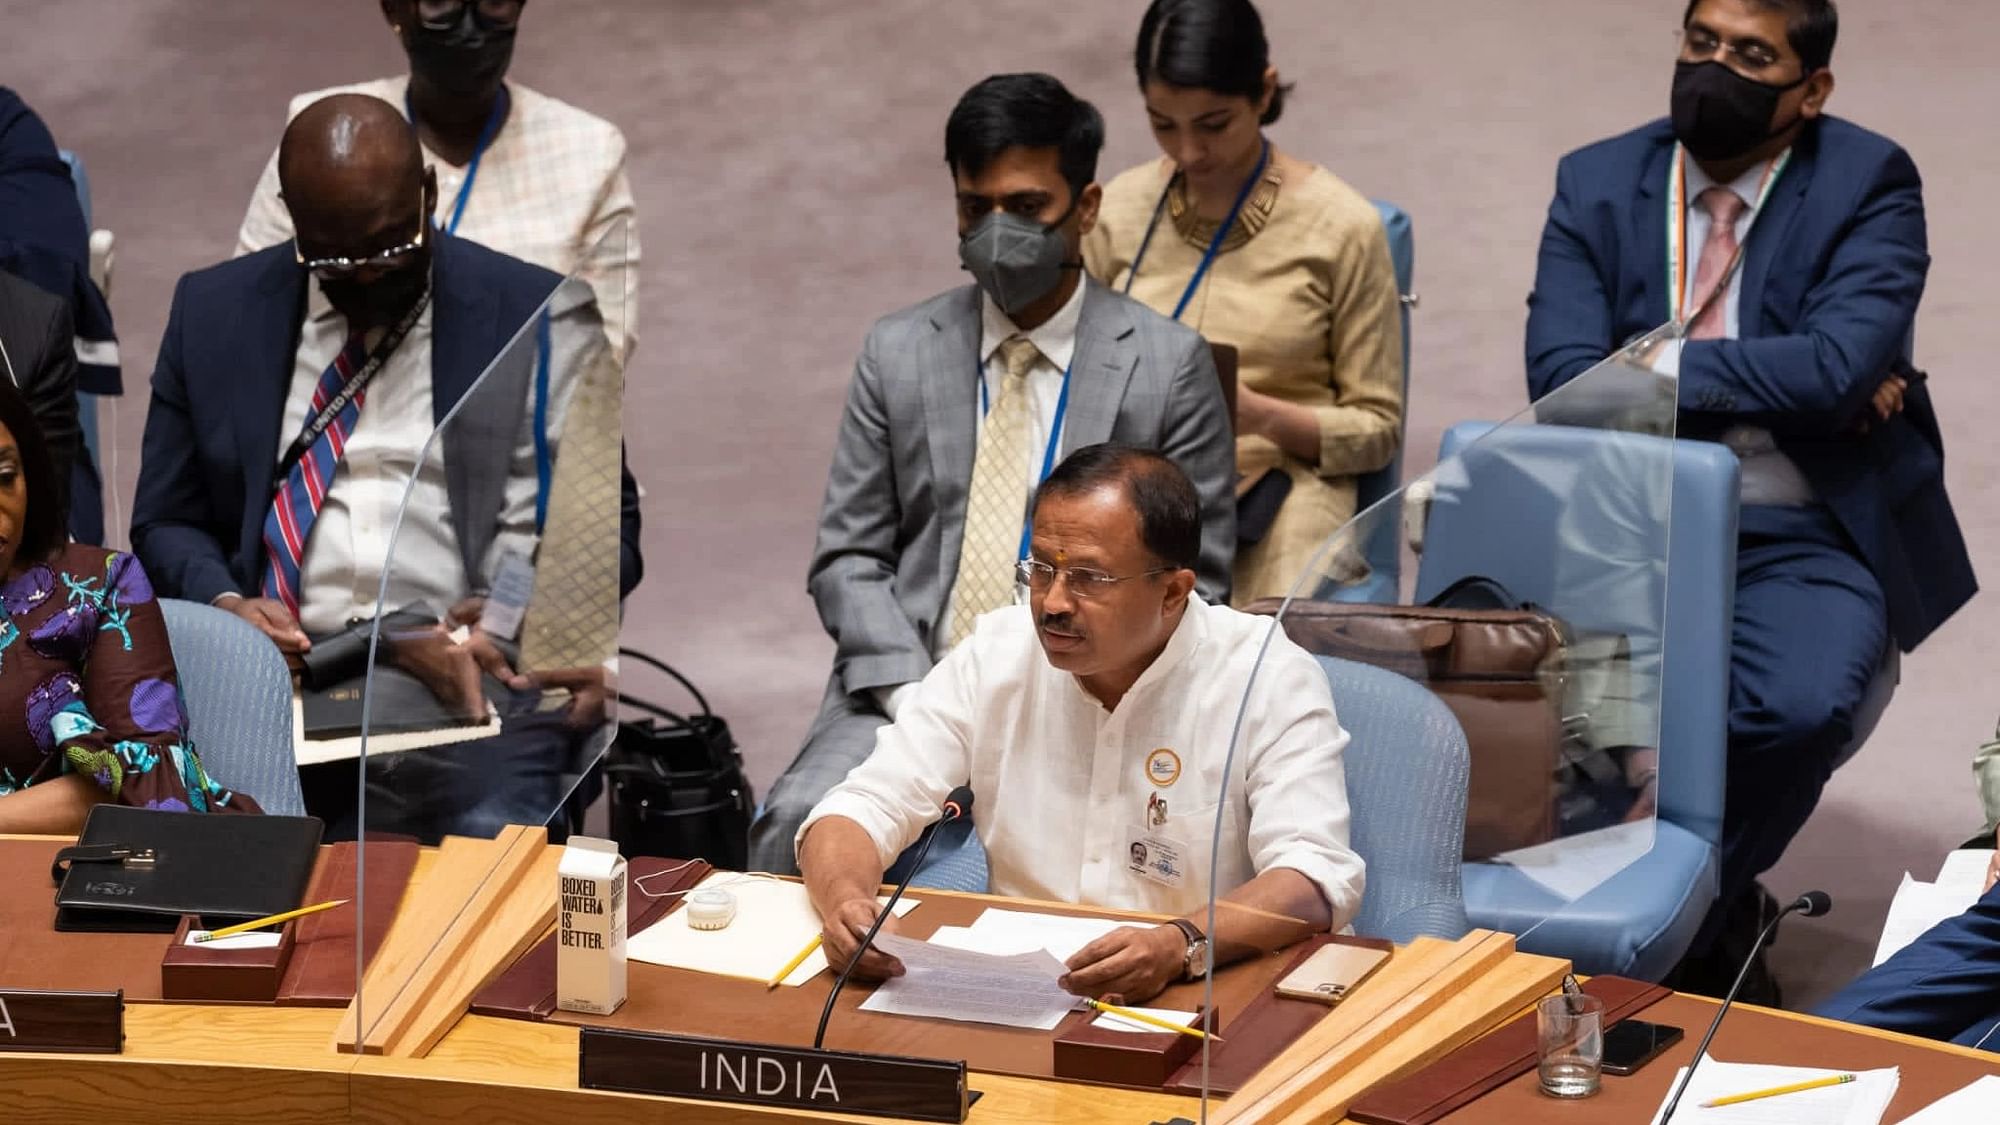 <div class="paragraphs"><p>Speaking at a meeting of the United Nations Security Council (UNSC) late on Thursday, 19 May, India justified its recently-imposed ban on wheat exports, saying that the measure will help the country manage its food security while still supporting vulnerable countries.</p></div>